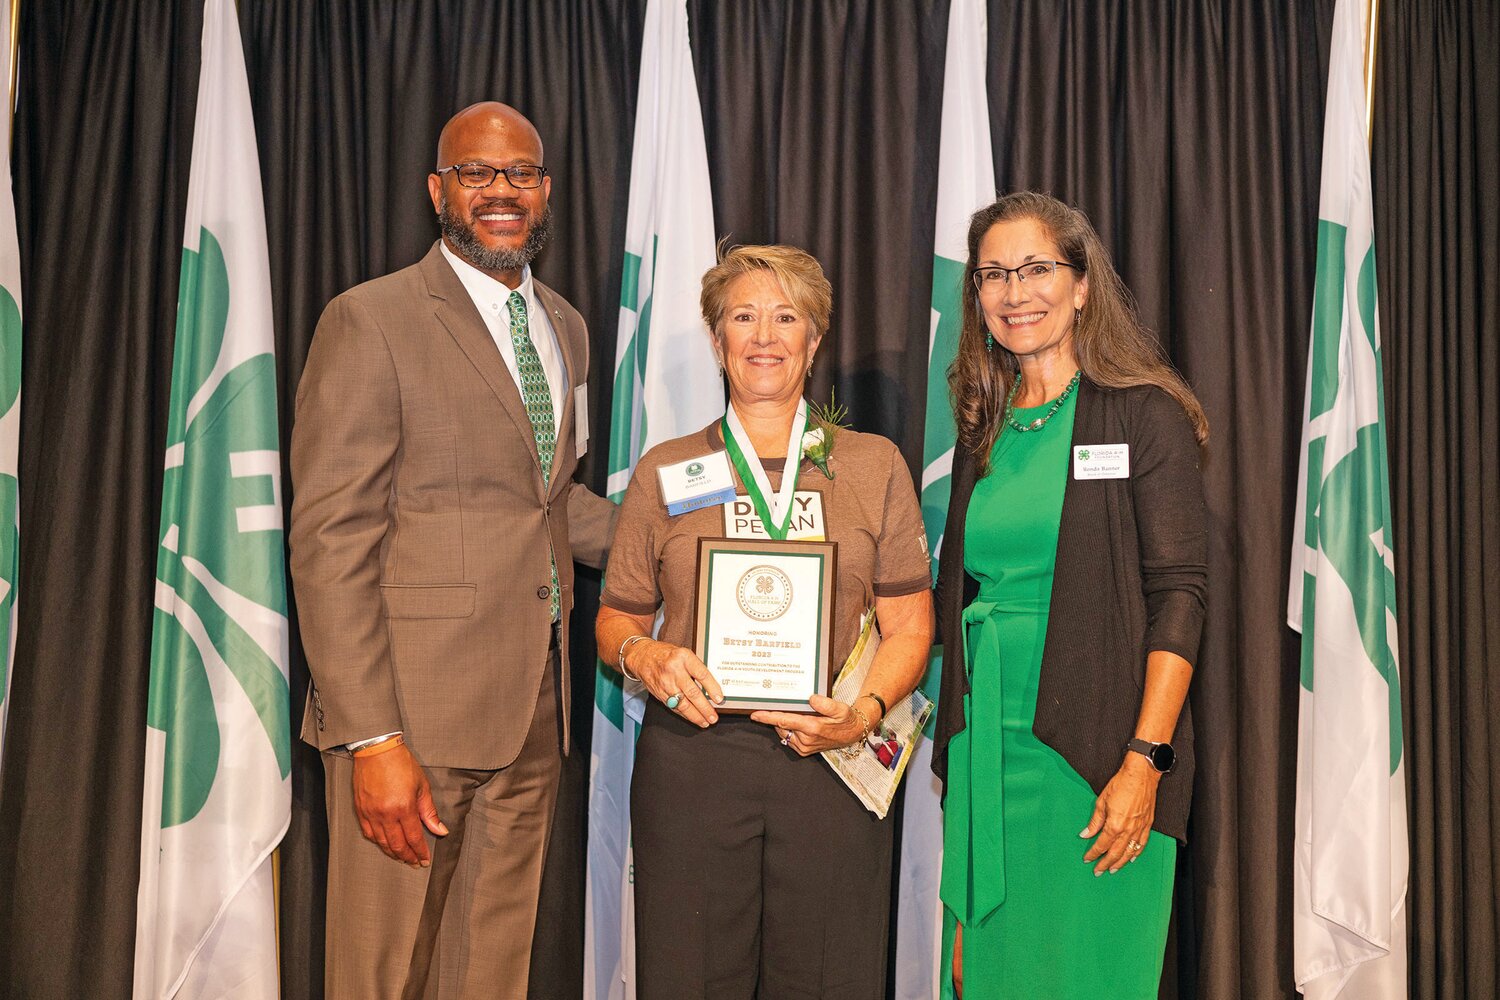 Betsy Barfield, middle, receives her induction plaque from the Florida 4-H on Aug. 3. At this ceremony, she gave a surprise donation of $10,000 to Florida 4-H to help build cabins at Camp Cherry Lake.